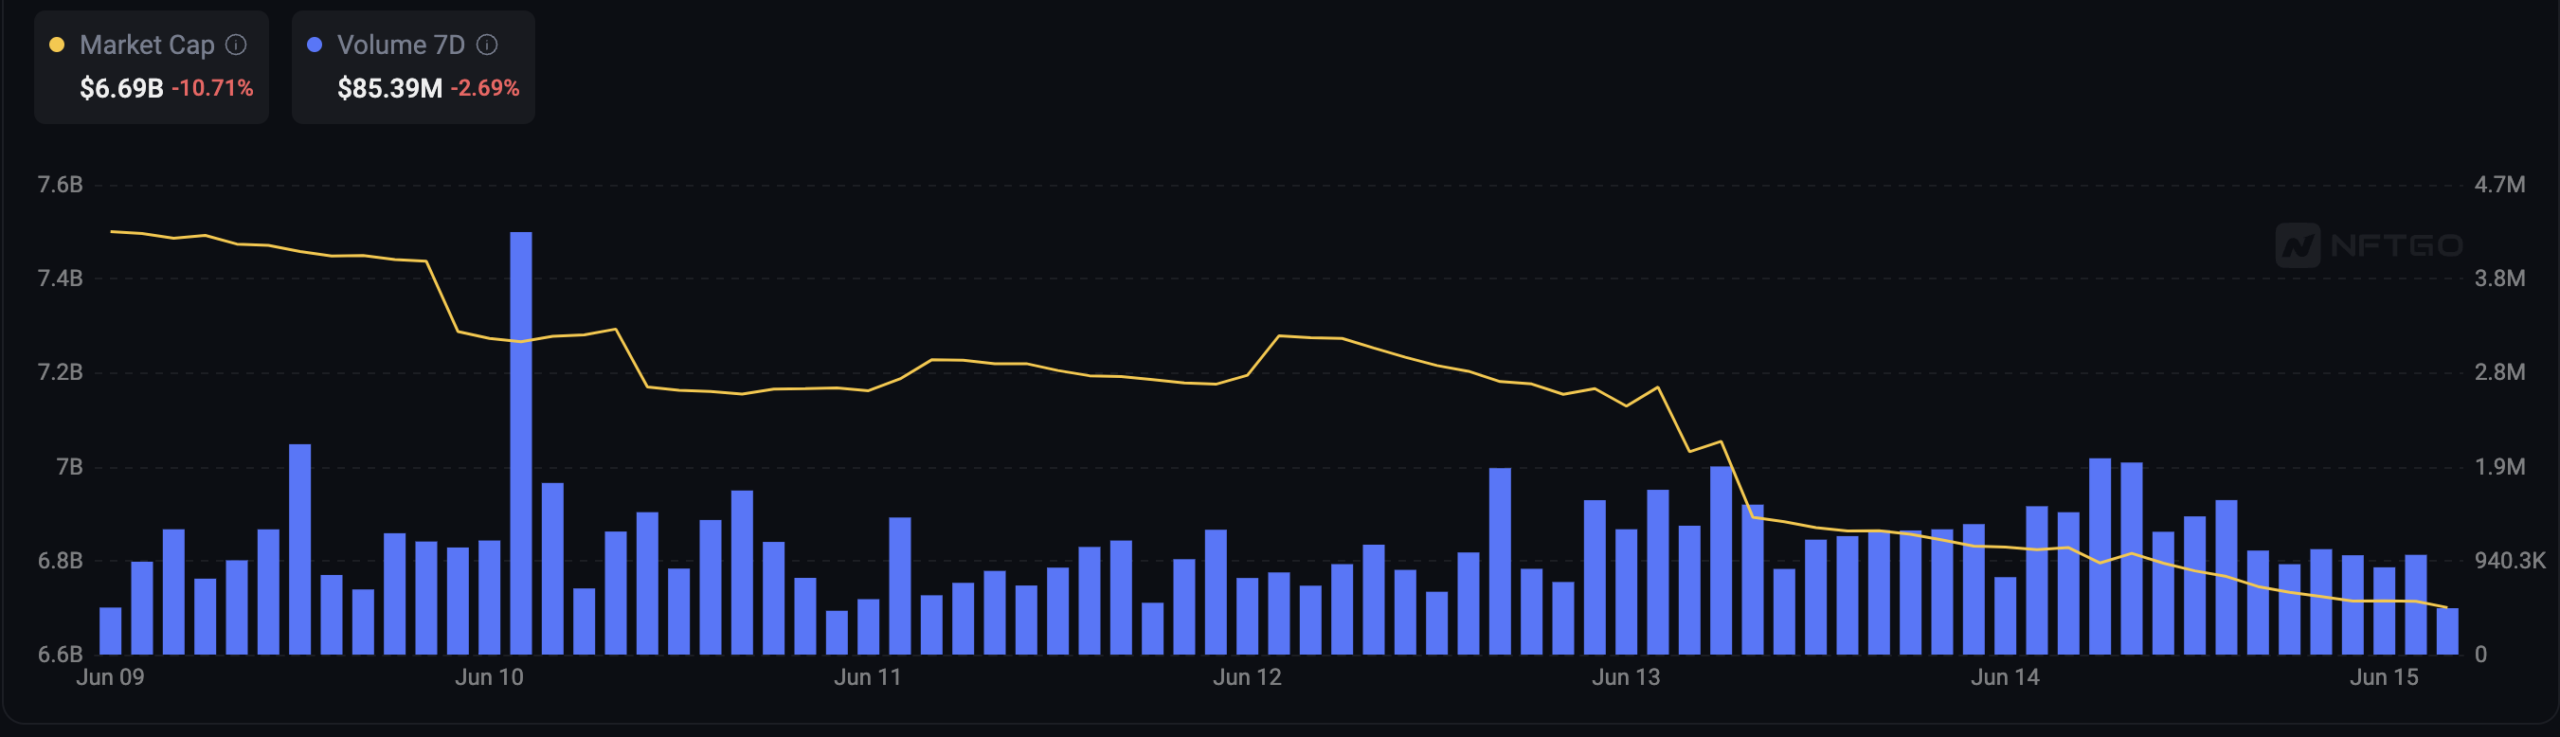 NFT market cap and trading volume